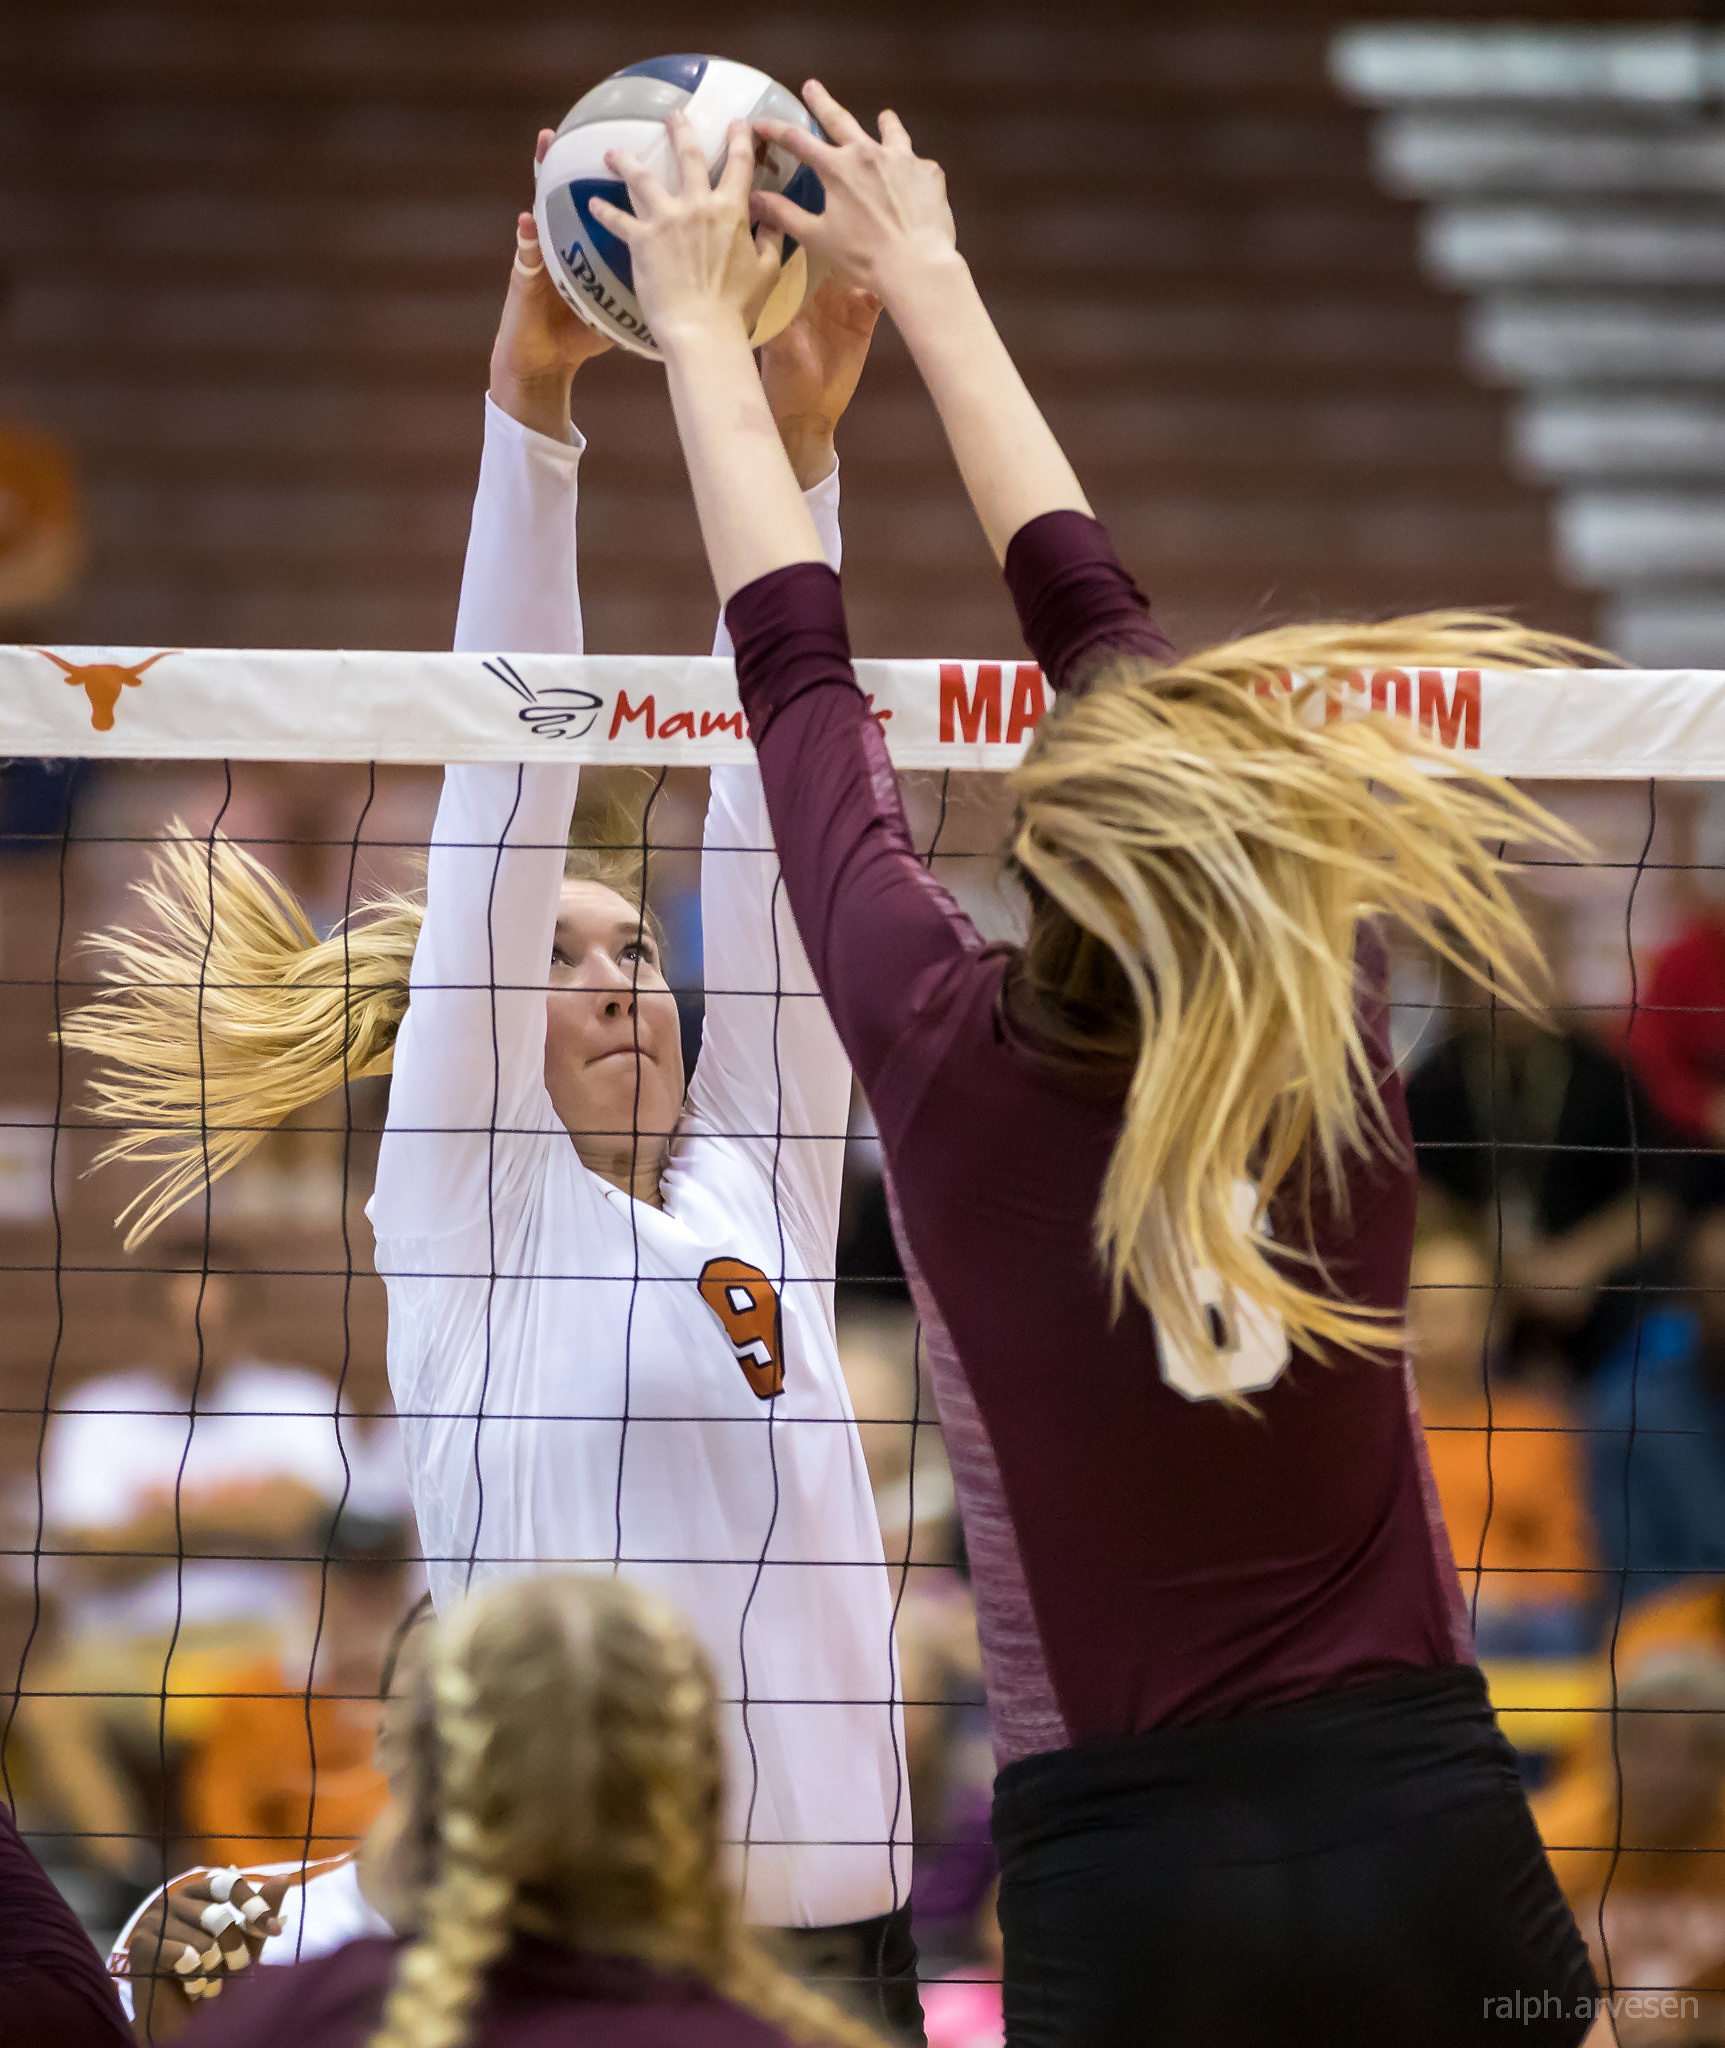 Terms For Volleyball Blocking Skills: If two opposing players go up to contact a ball at the same time over the net, the last player to contact the ball almost always wins (Ralph Aversen)